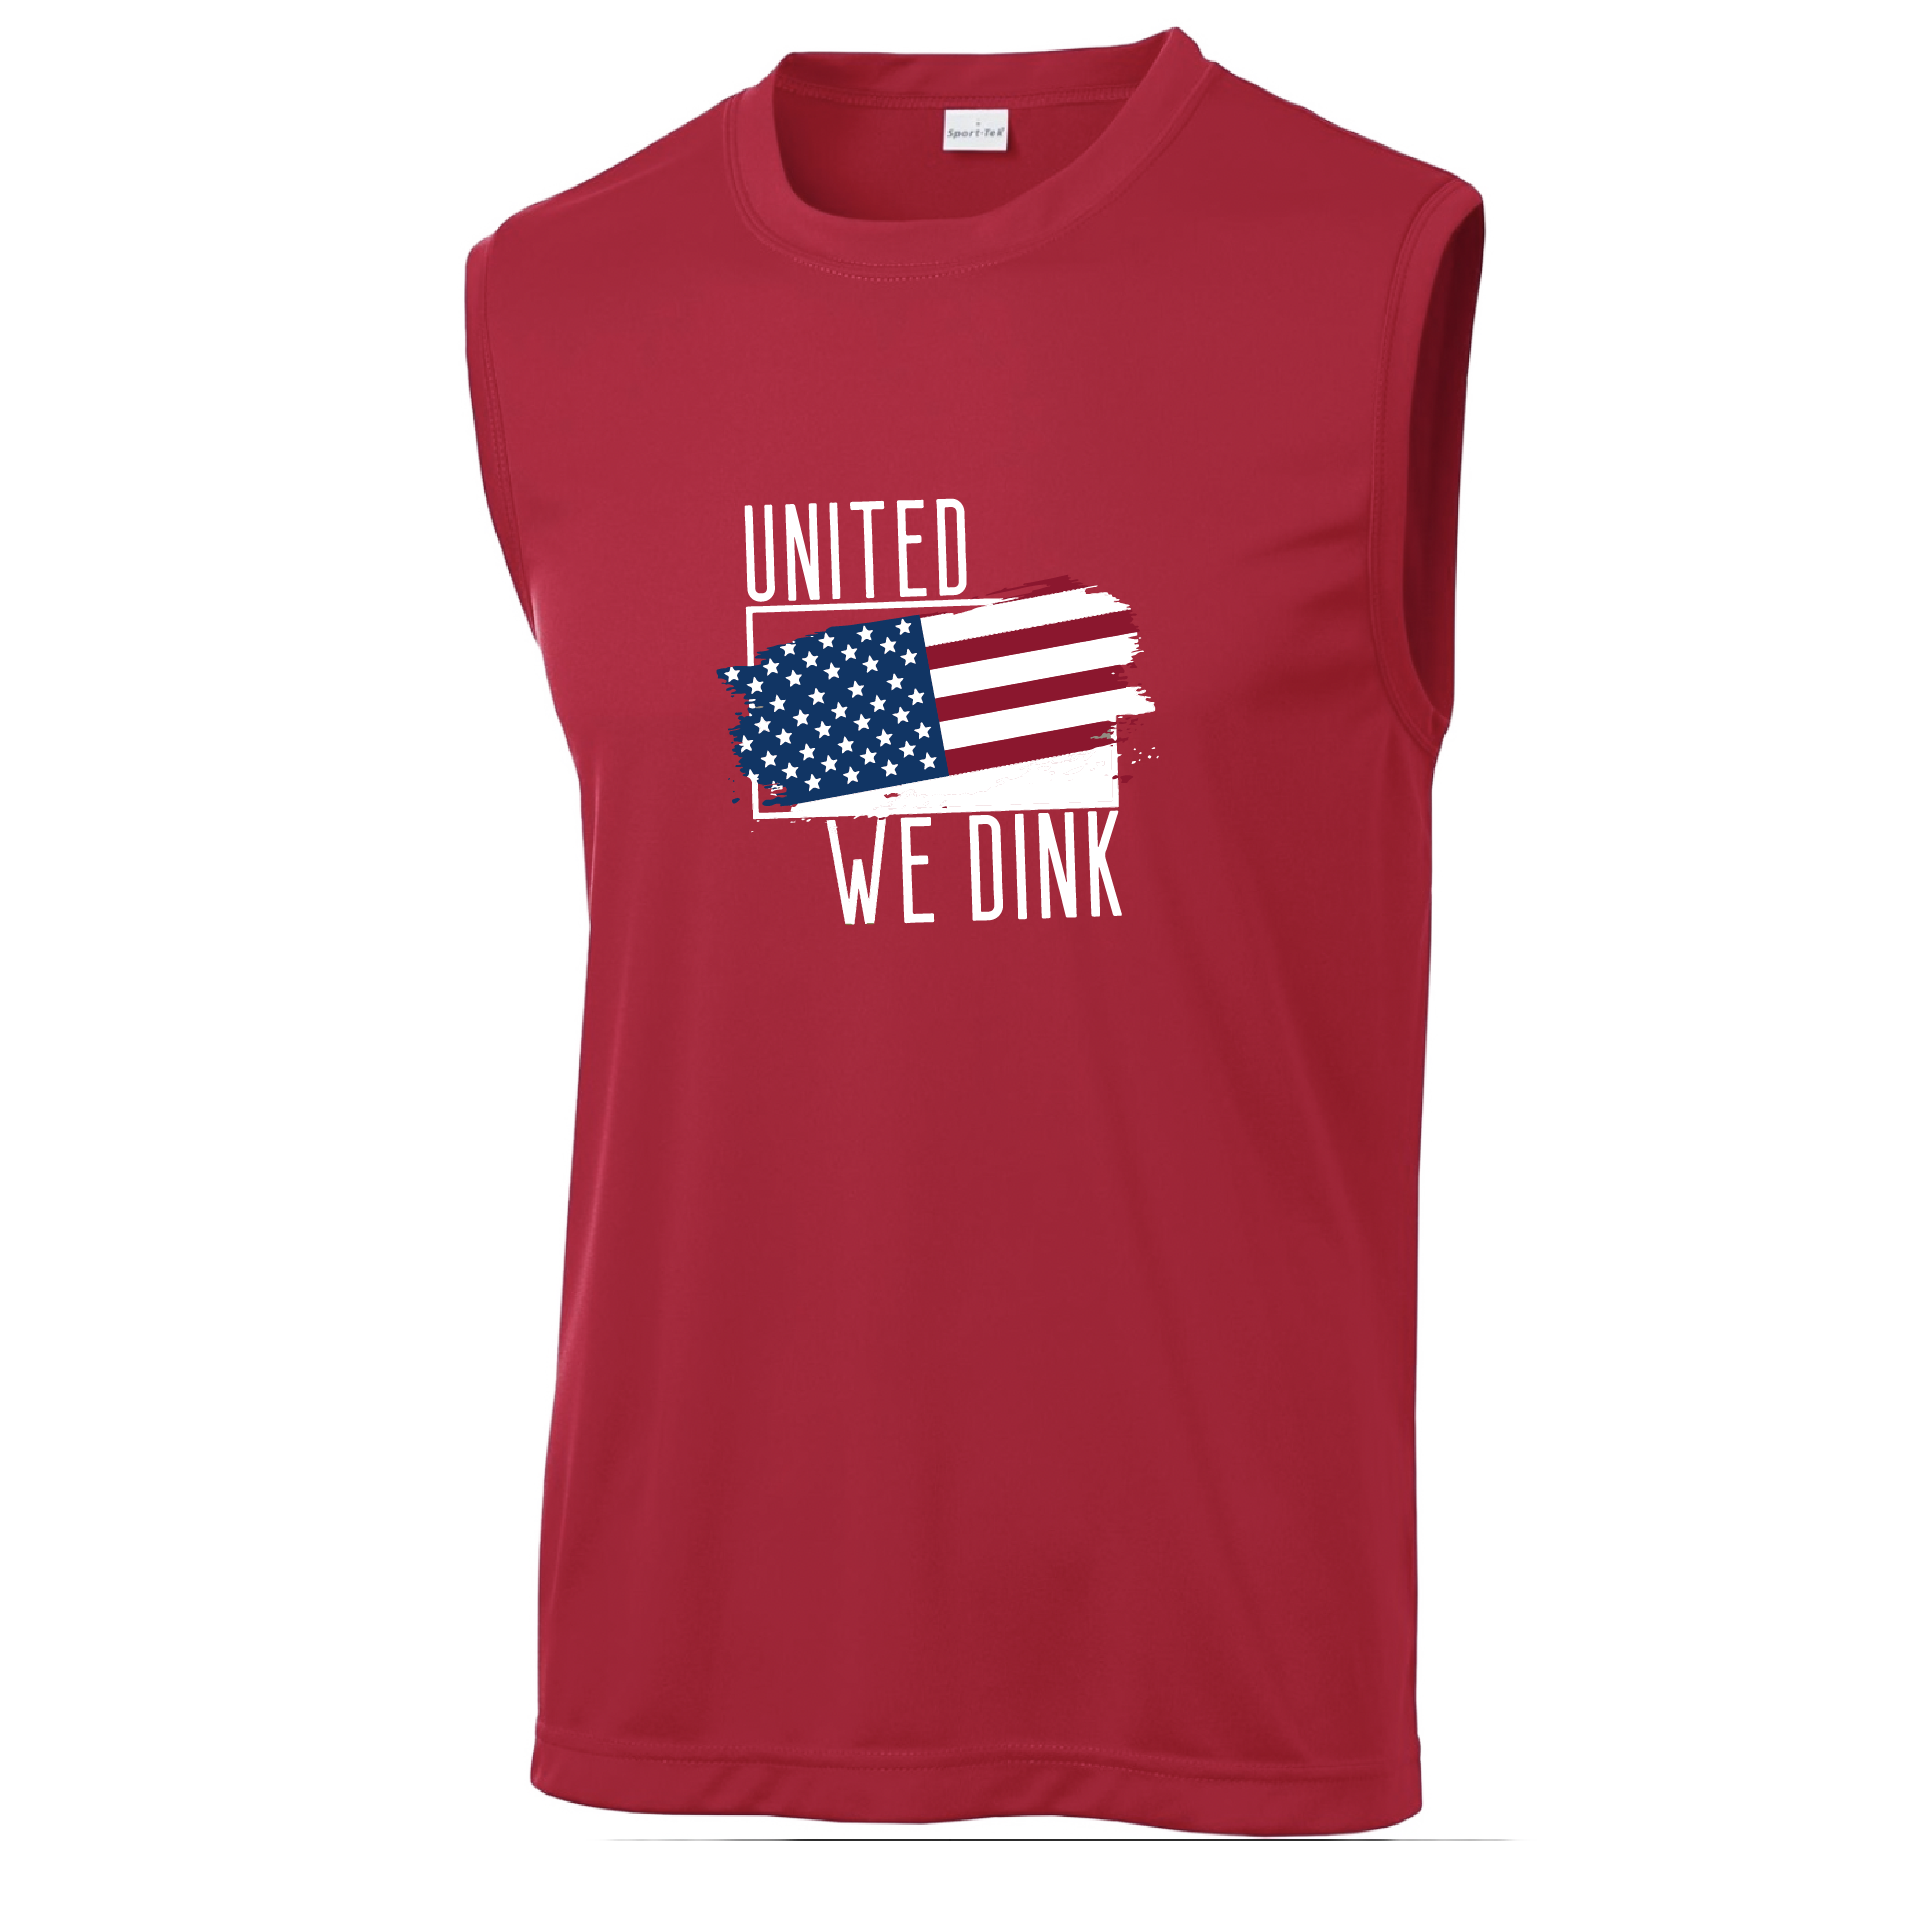 Pickleball Design: United We Dink  Men's Styles: Sleeveless  Shirts are lightweight, roomy and highly breathable. These moisture-wicking shirts are designed for athletic performance. They feature PosiCharge technology to lock in color and prevent logos from fading. Removable tag and set-in sleeves for comfort.